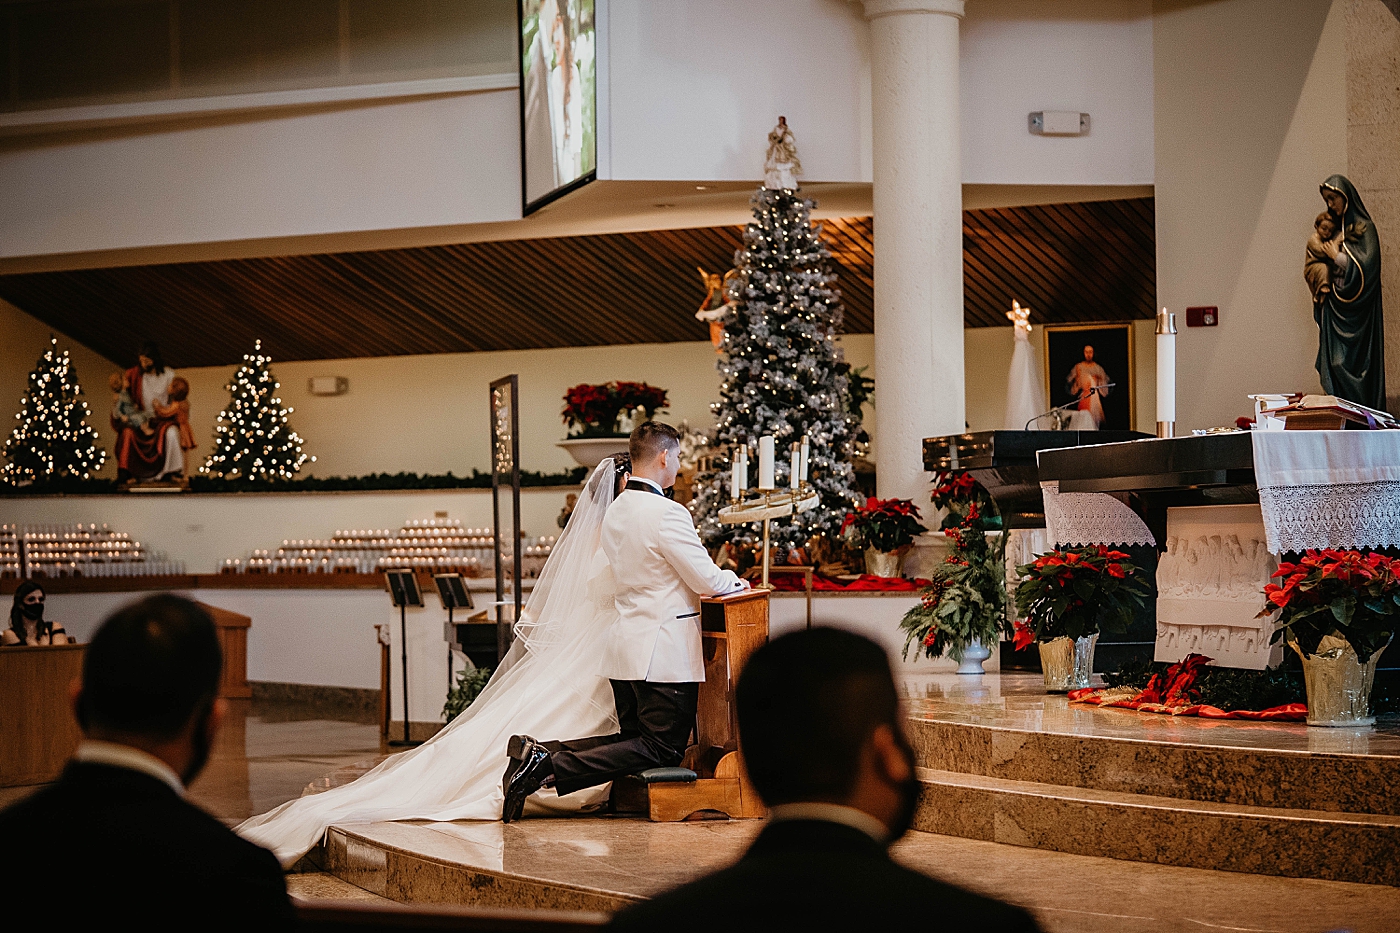 Bride and Groom at the alter with Christmas decor Lavan Venue Wedding Photography captured by South Florida Wedding Photographer Krystal Capone Photography